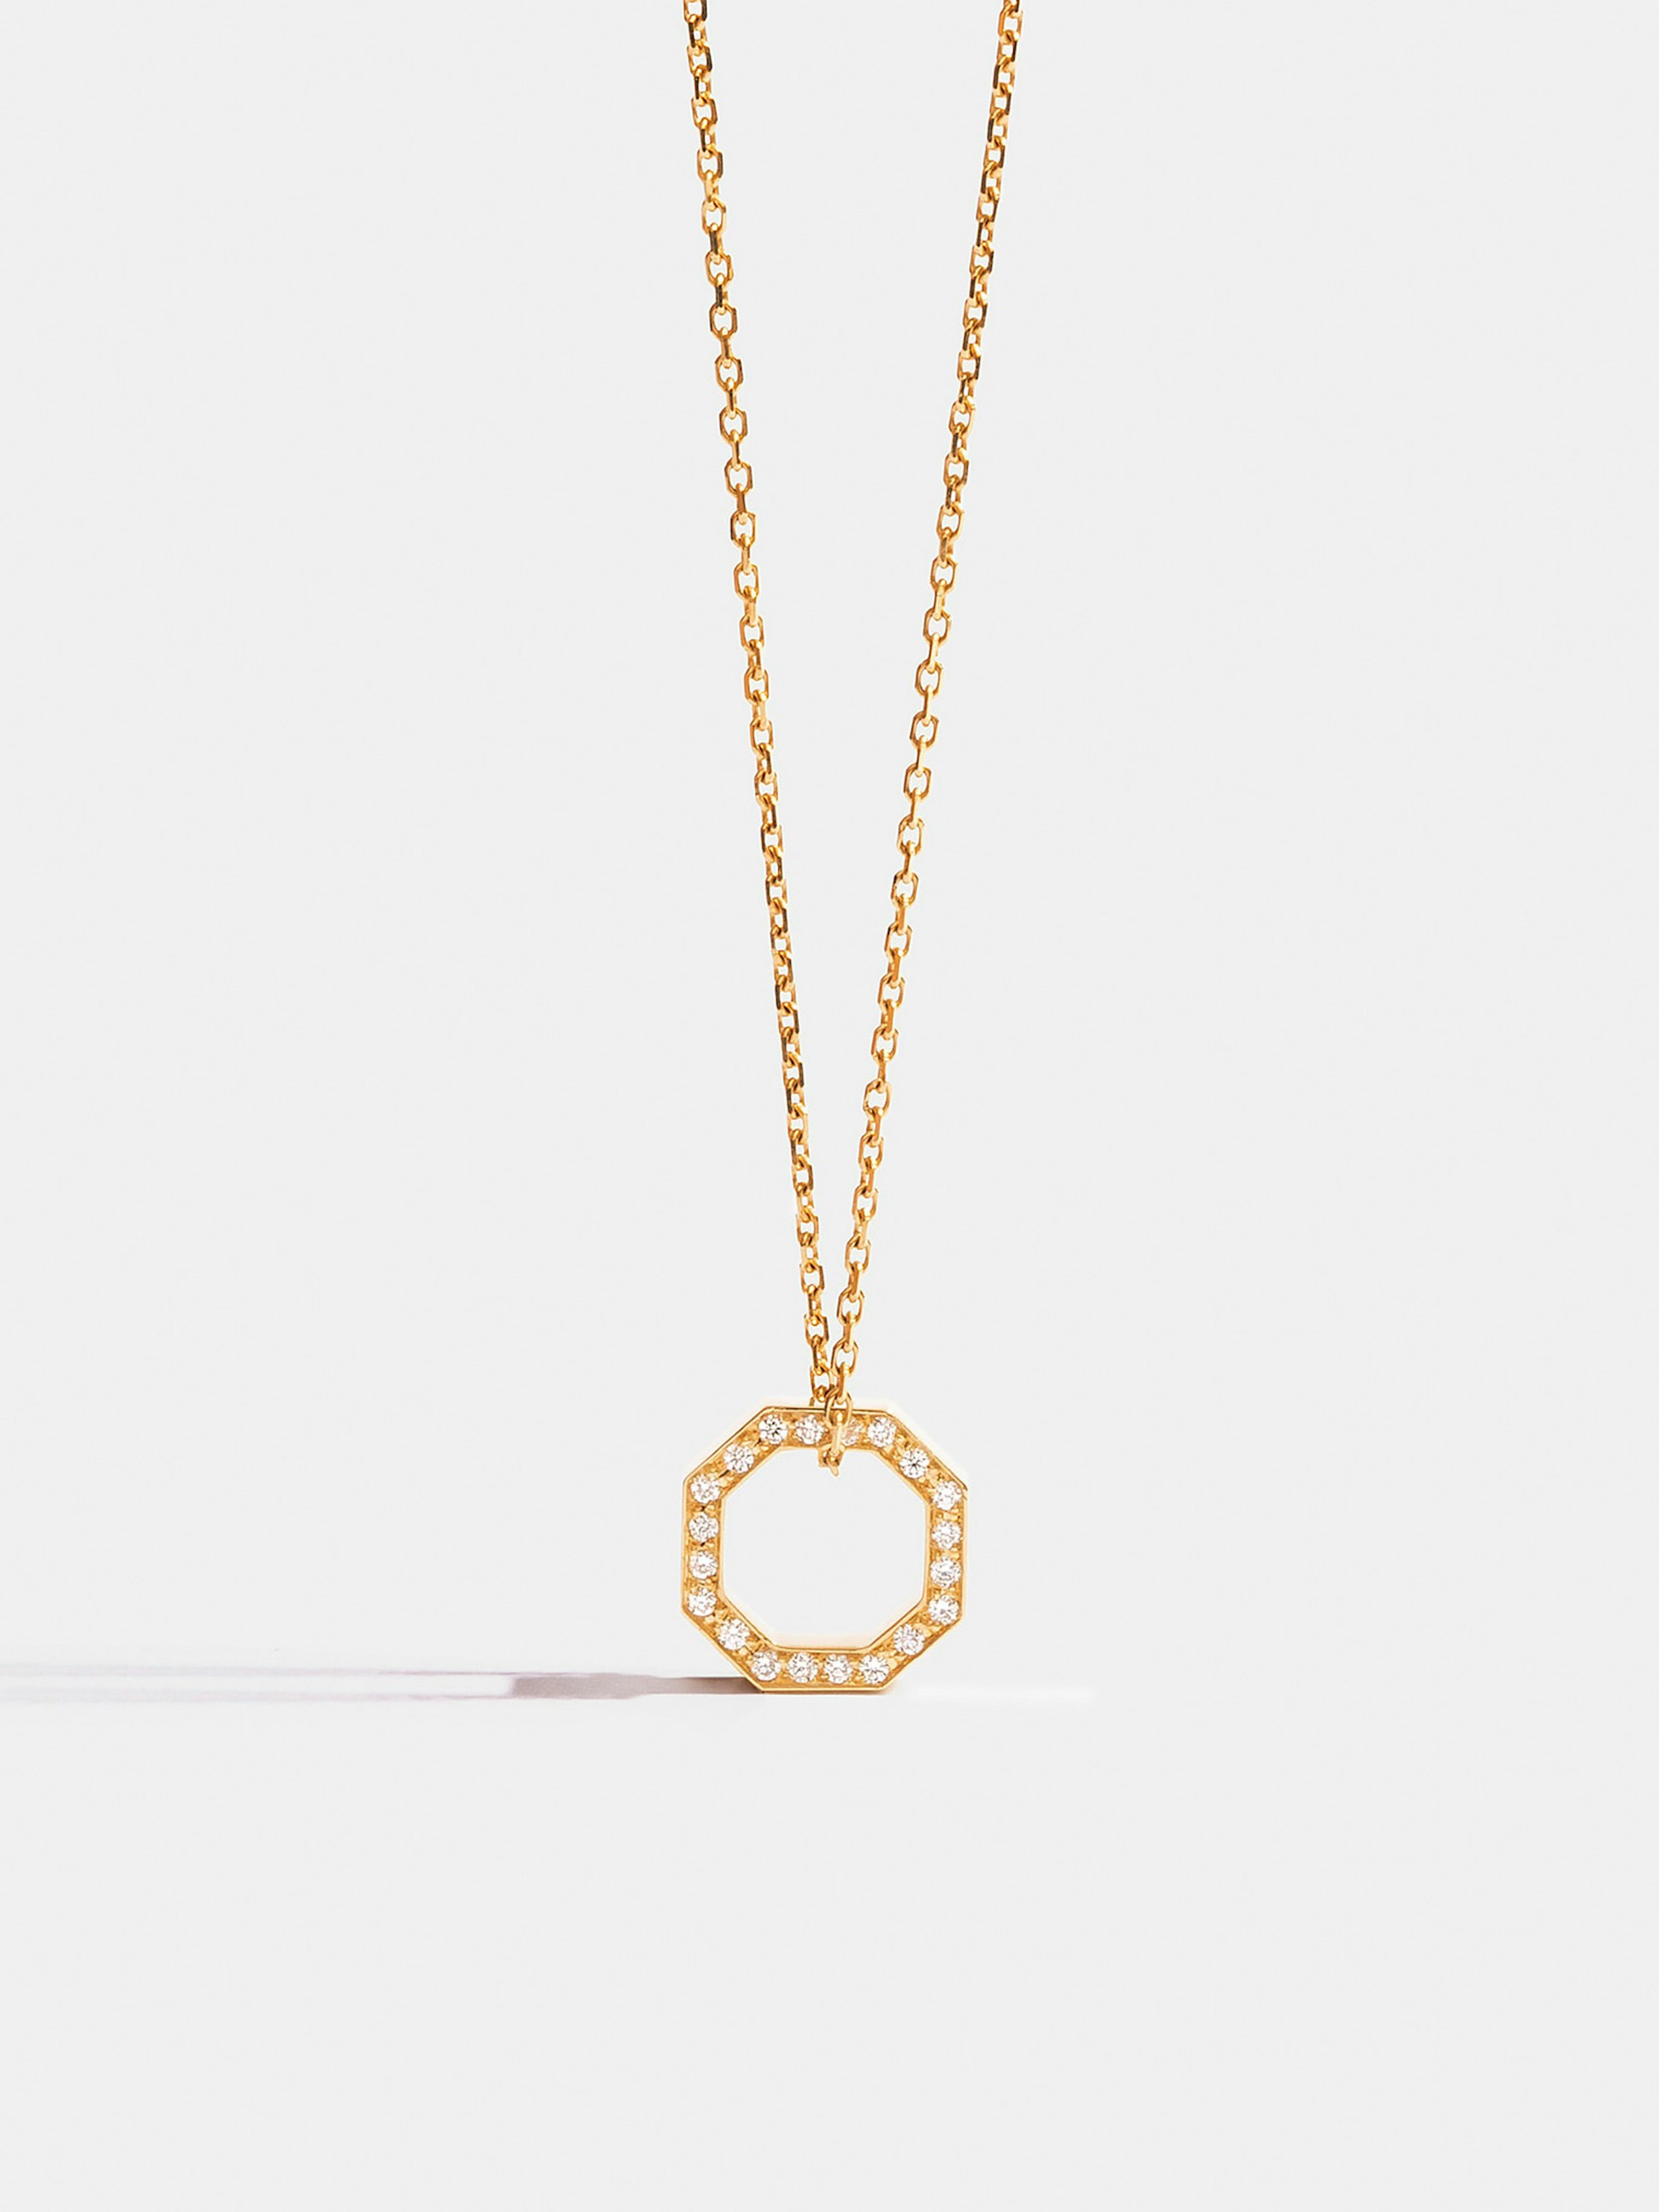 Octogone 10mm pendant in 18k Fairmined ethical yellow gold, paved with lab-grown diamonds, on a chain.